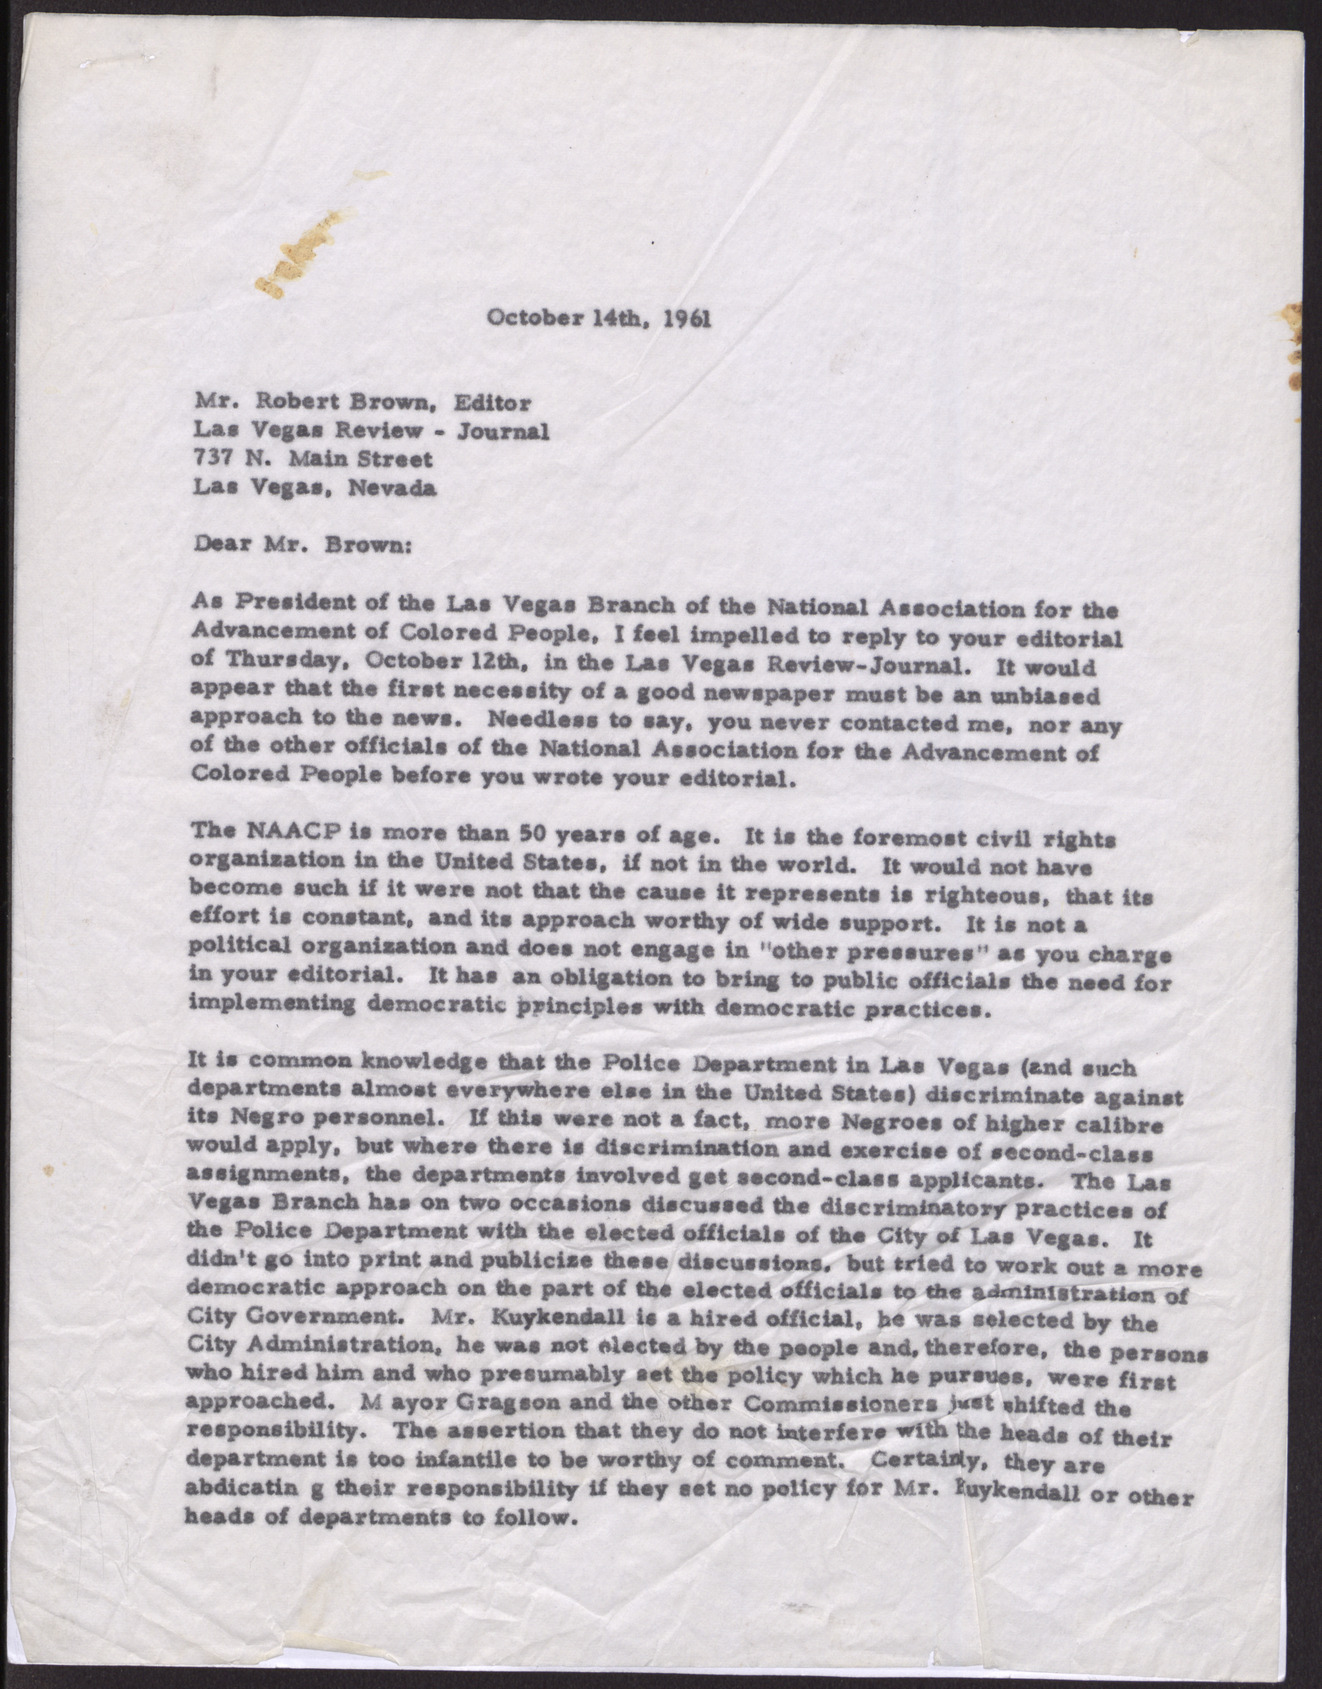 Letter to Robert Brown, Editor at Las Vegas Review Journal, from Rev. Donald M. Clark (2 pages), October 14, 1961